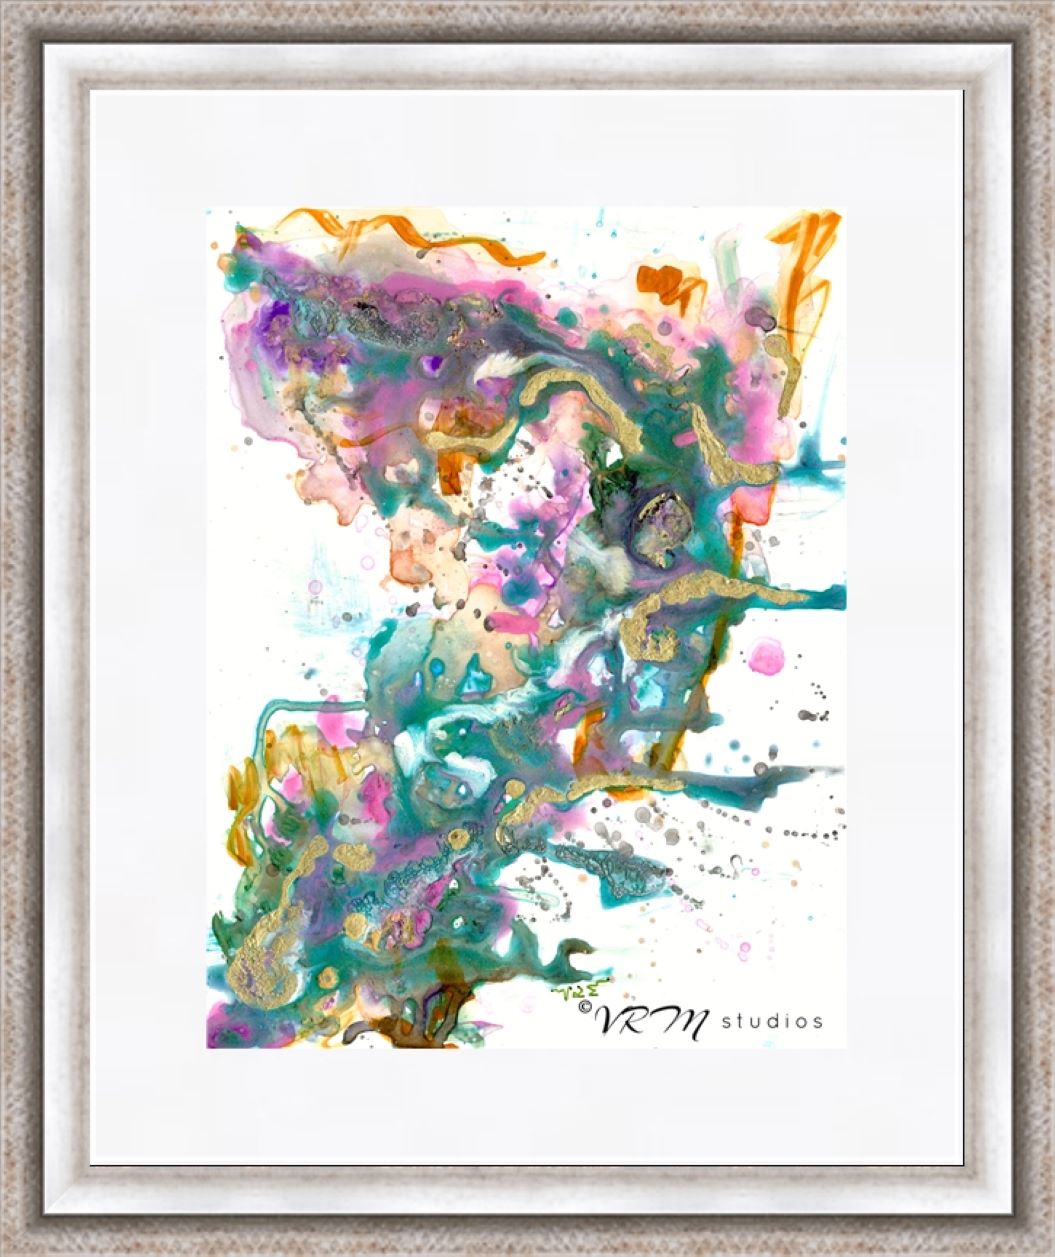 Anew, original fluid art painting on yupo paper, matted, 11x14 inches